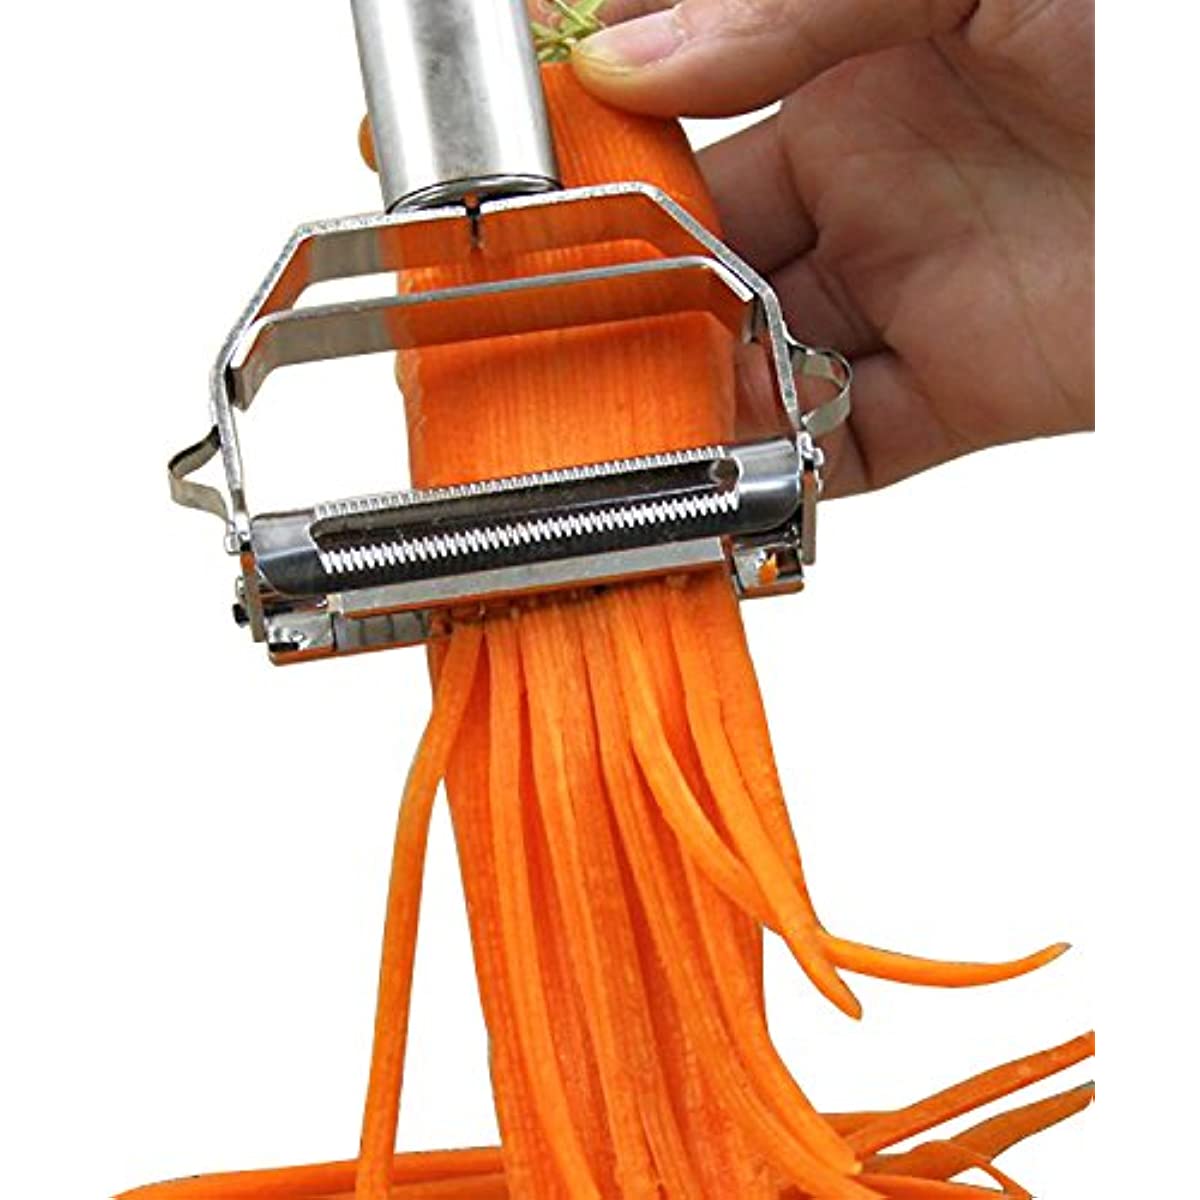 Julienne Peeler Stainless Steel Cutter Slicer with Cleaning Brush Pro for  Carrot Potato Melon Gadget Vegetable Fruit 